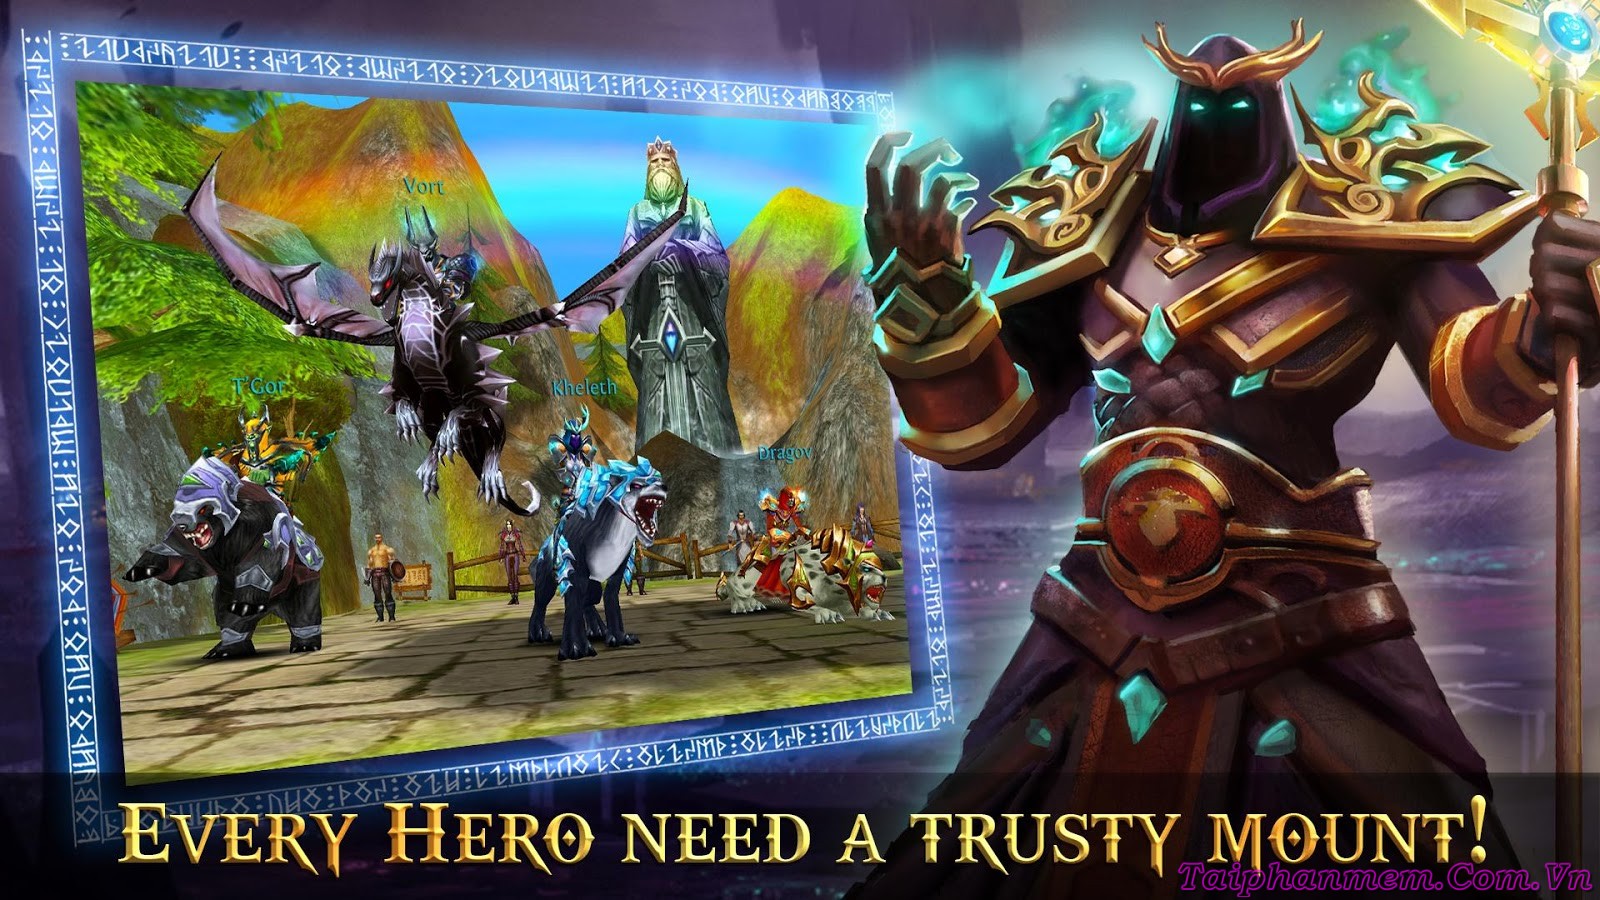  Systems equipped with a variety of Heroes of Order & Chaos game